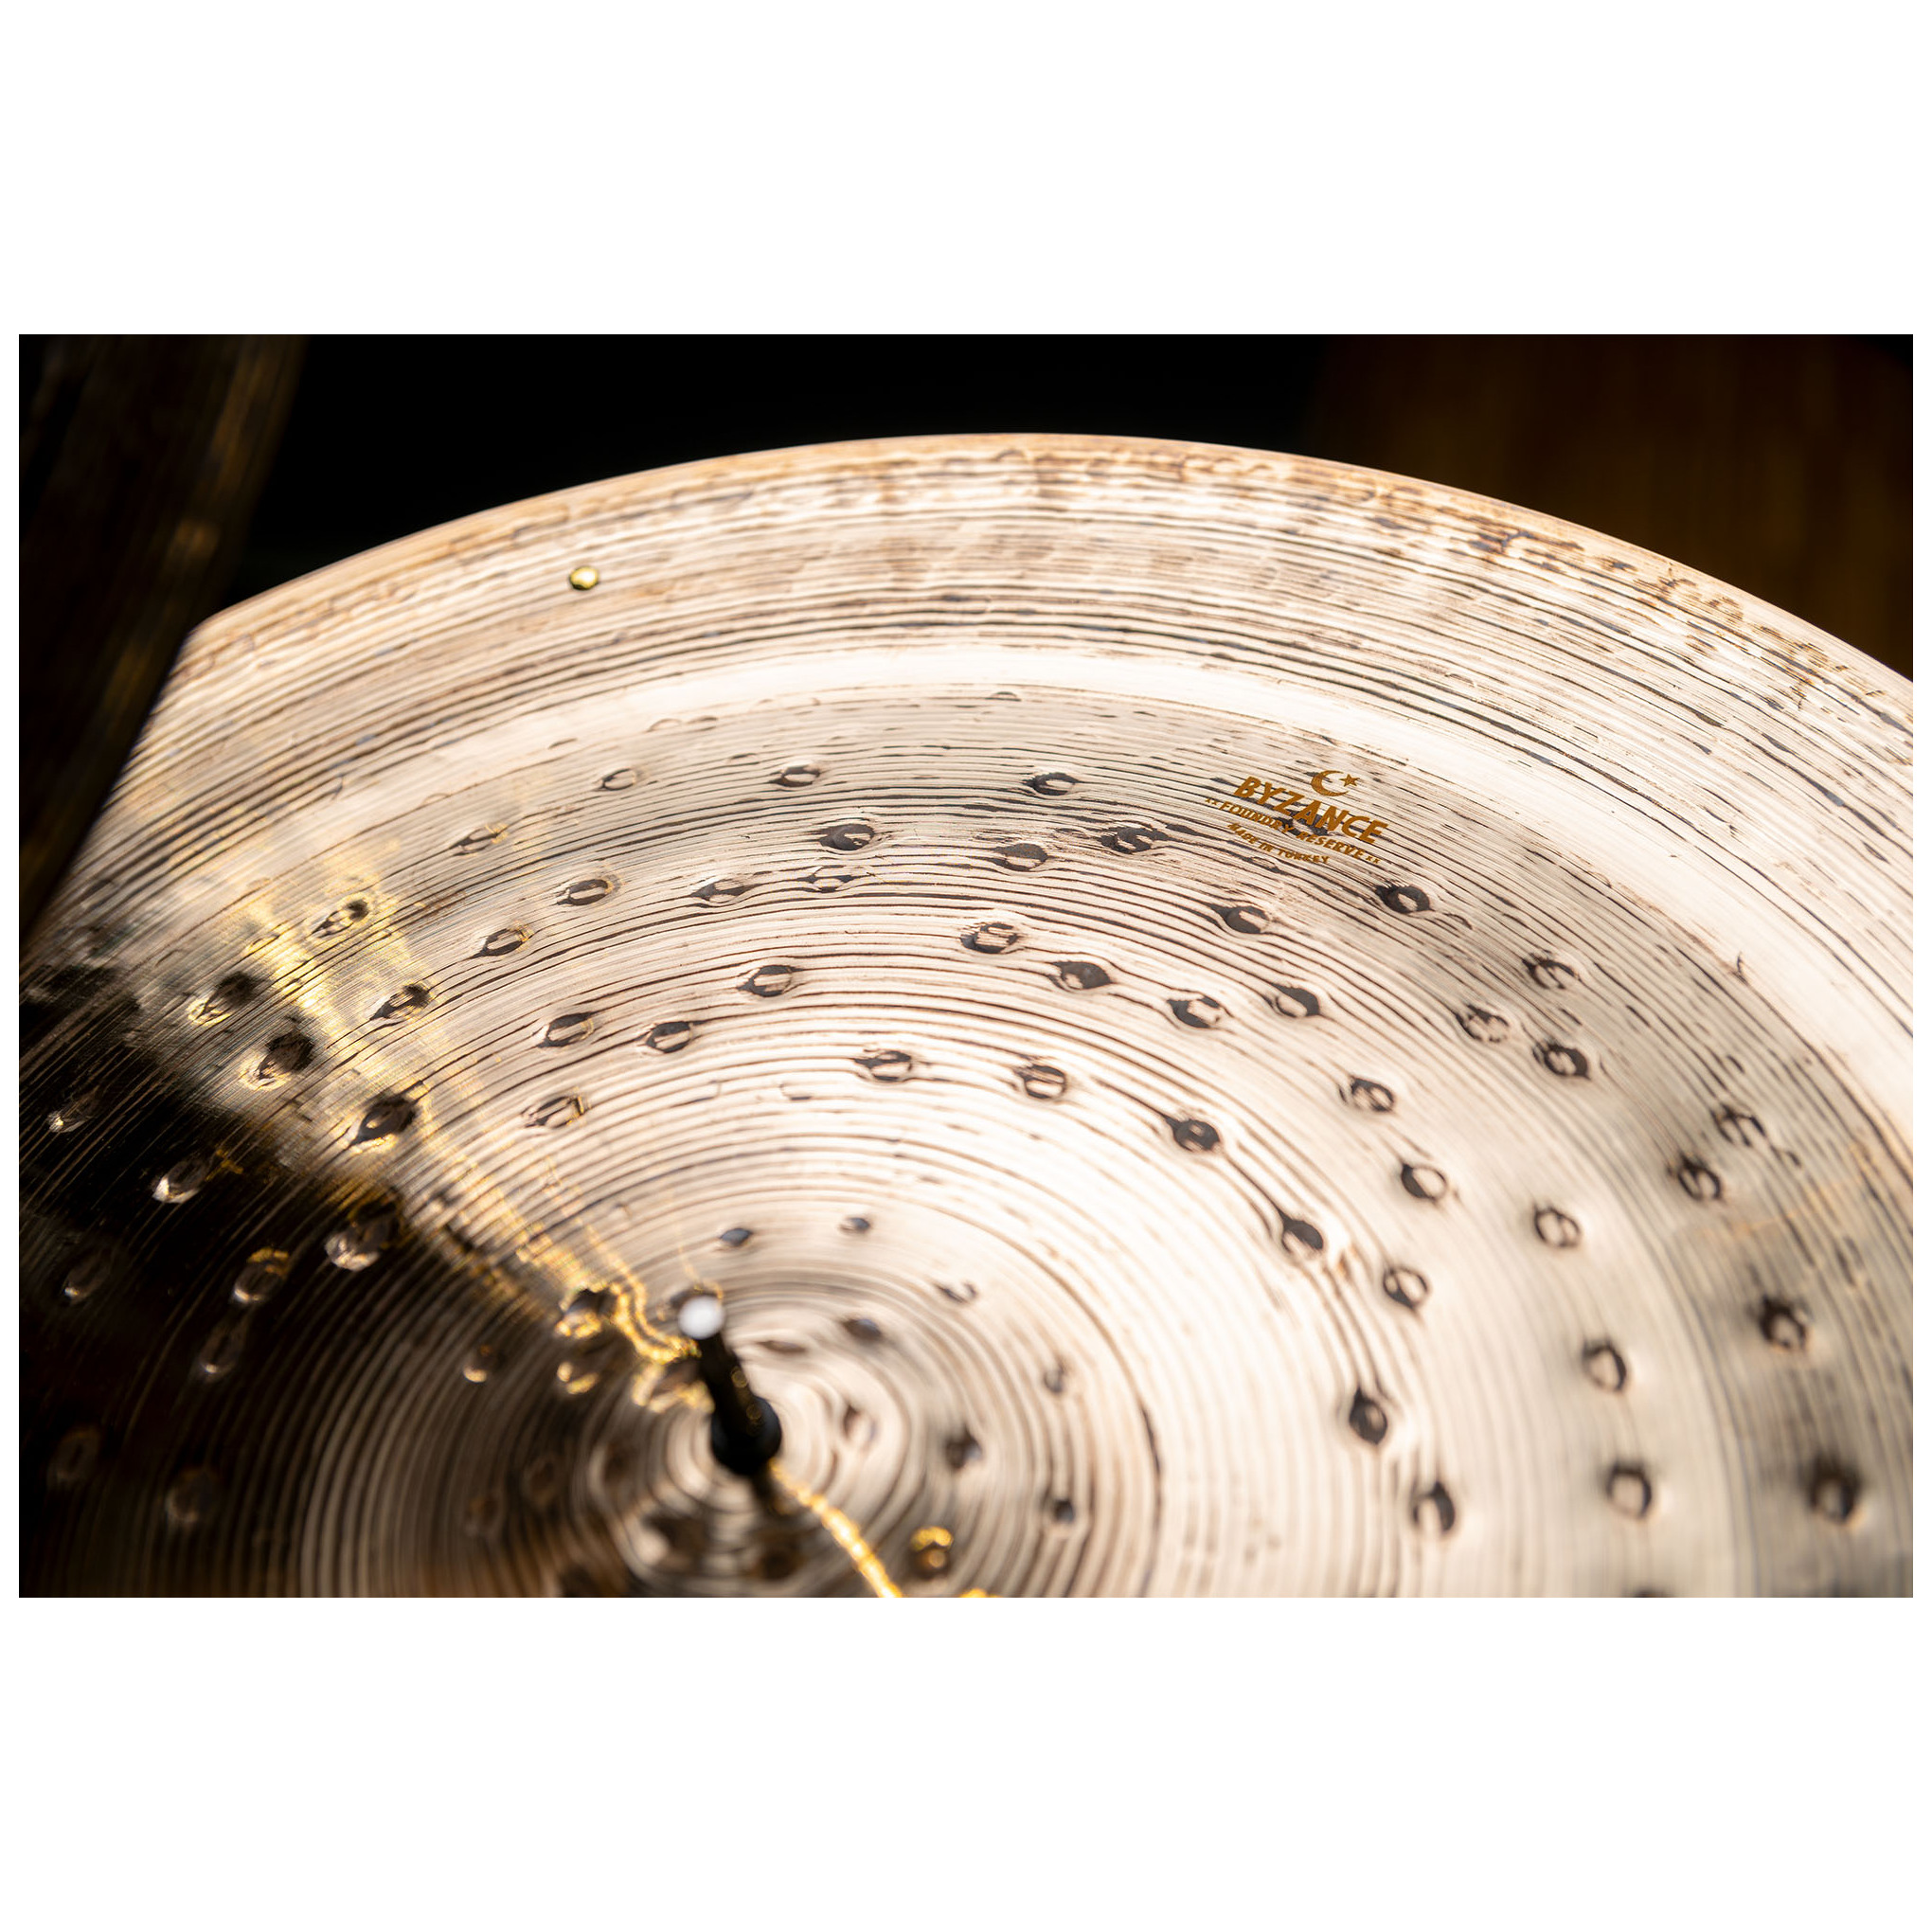 Meinl Cymbals B22FRCHR - 22" Byzance Foundry Reserve China Ride 1